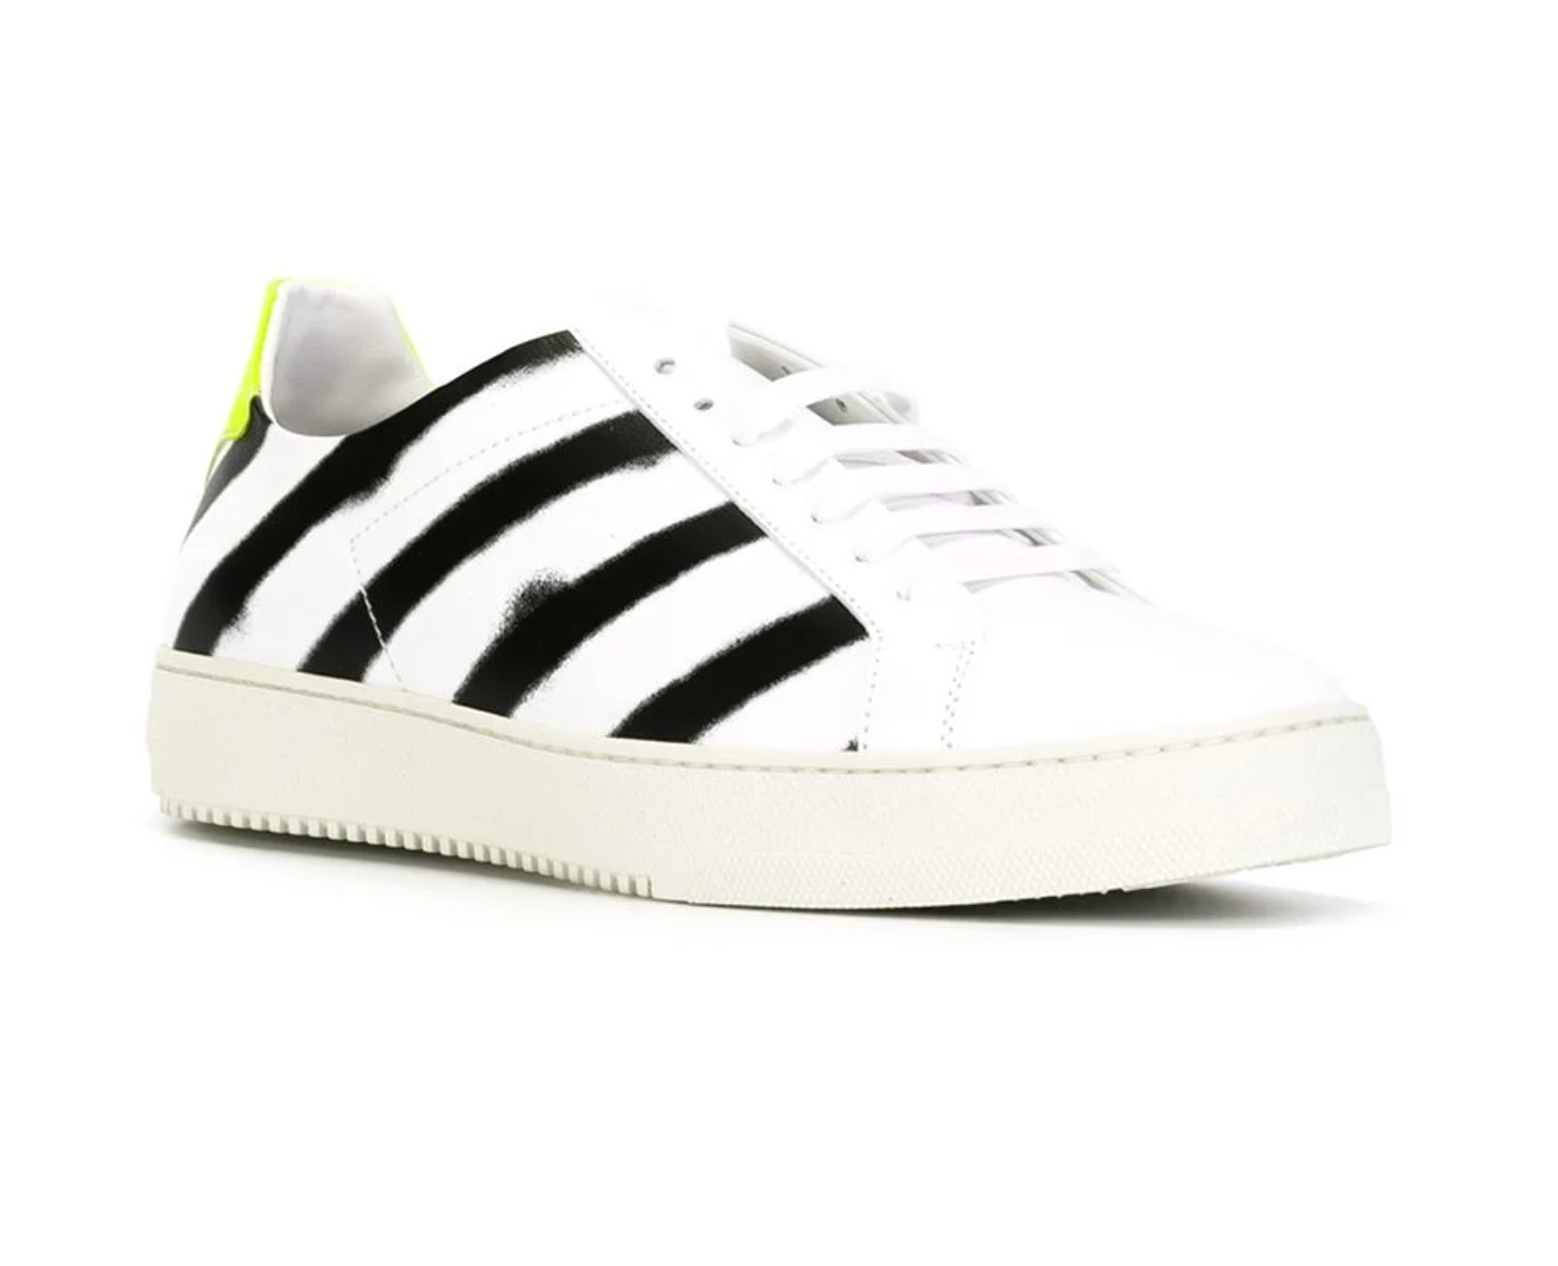 Chic Spray Paint Effect Leather Sneakers